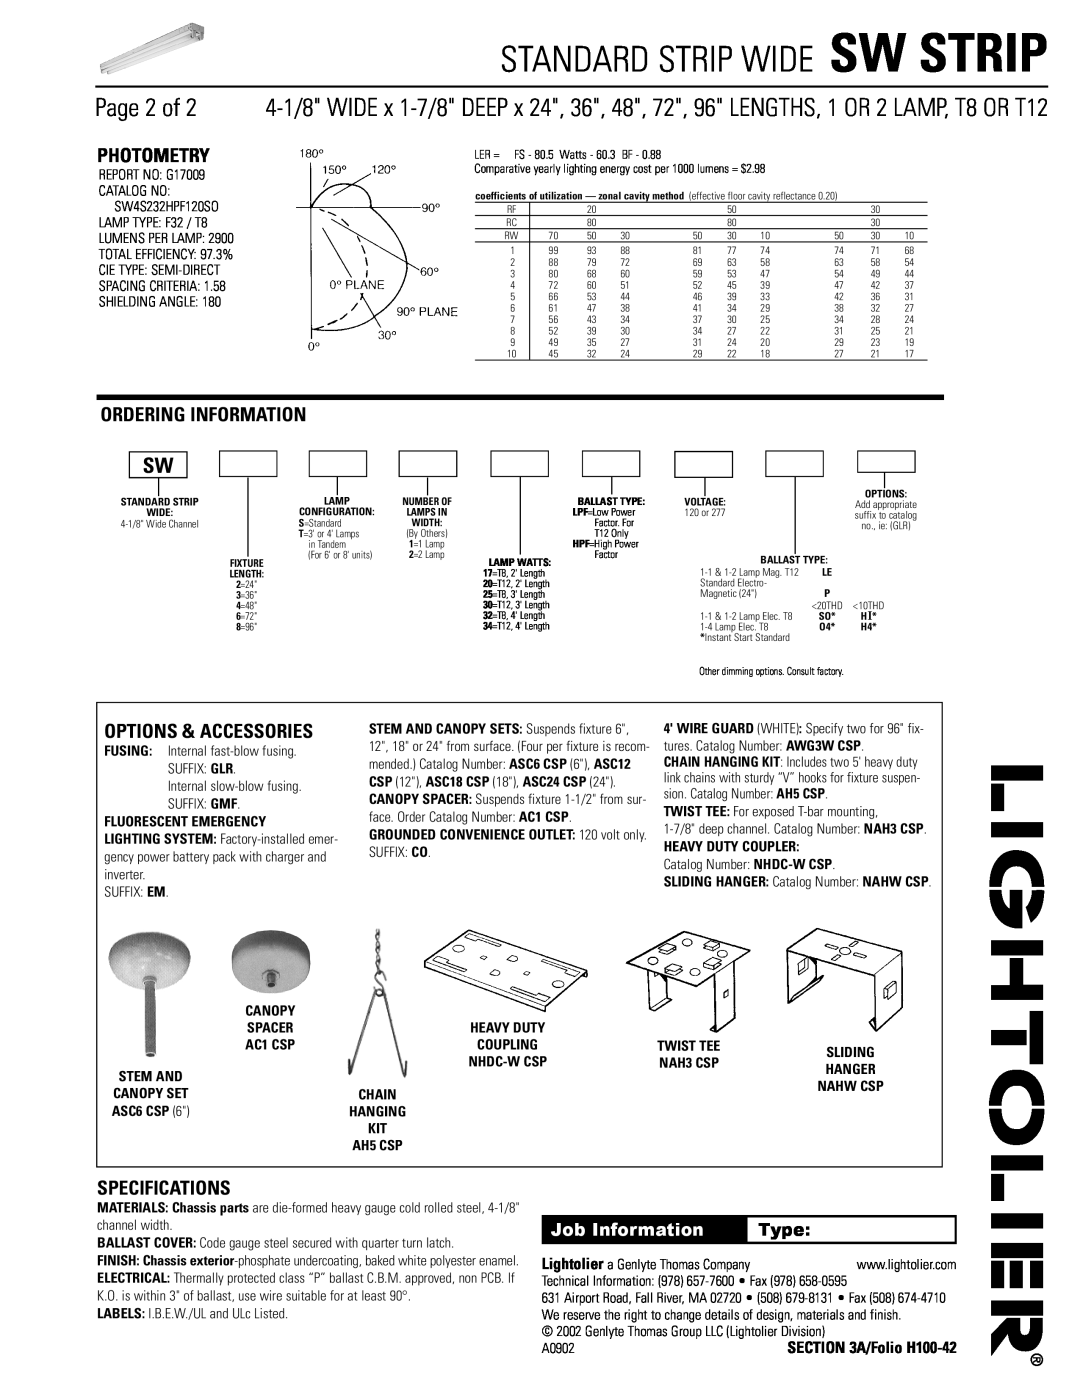 Lightolier SW STRIP Photometry, Ordering Information, Specifications, Standard Strip Wide Sw Strip, Options & Accessories 